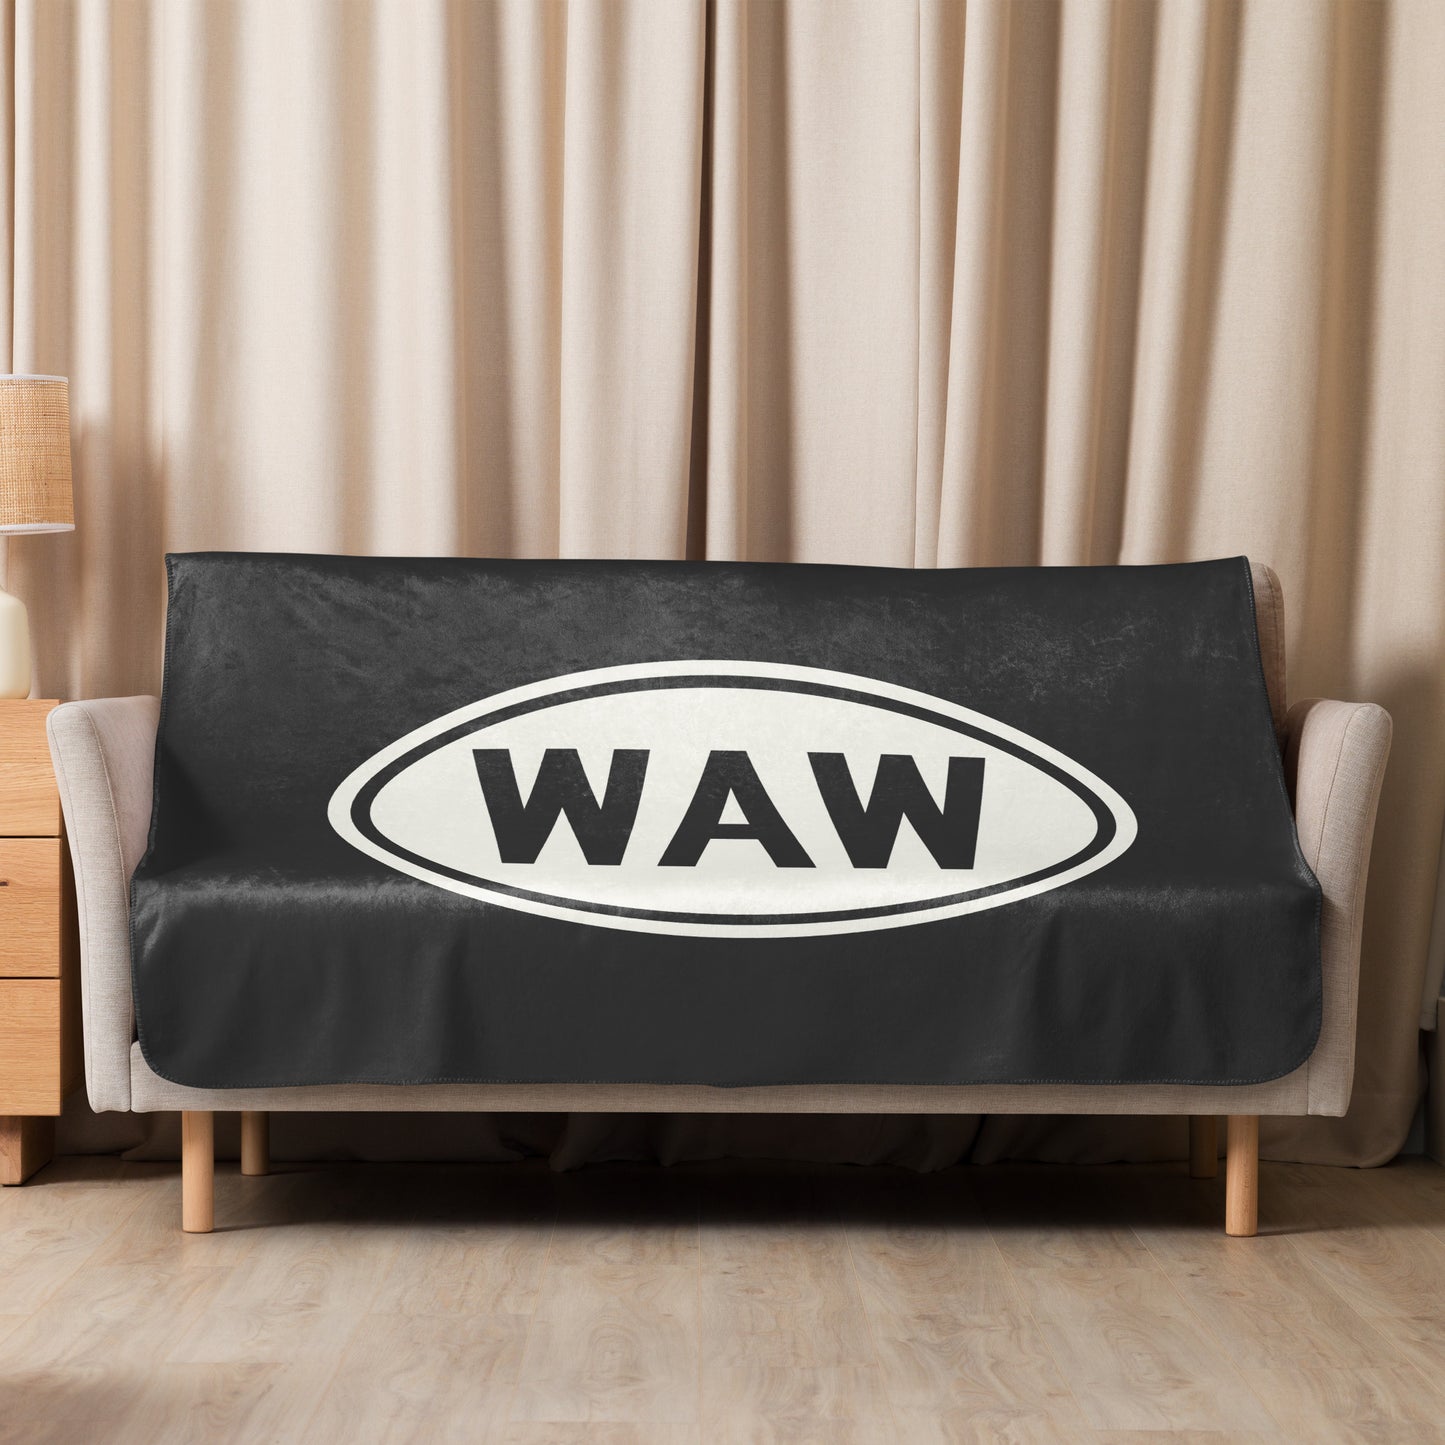 Unique Travel Gift Sherpa Blanket - White Oval • WAW Warsaw • YHM Designs - Image 07